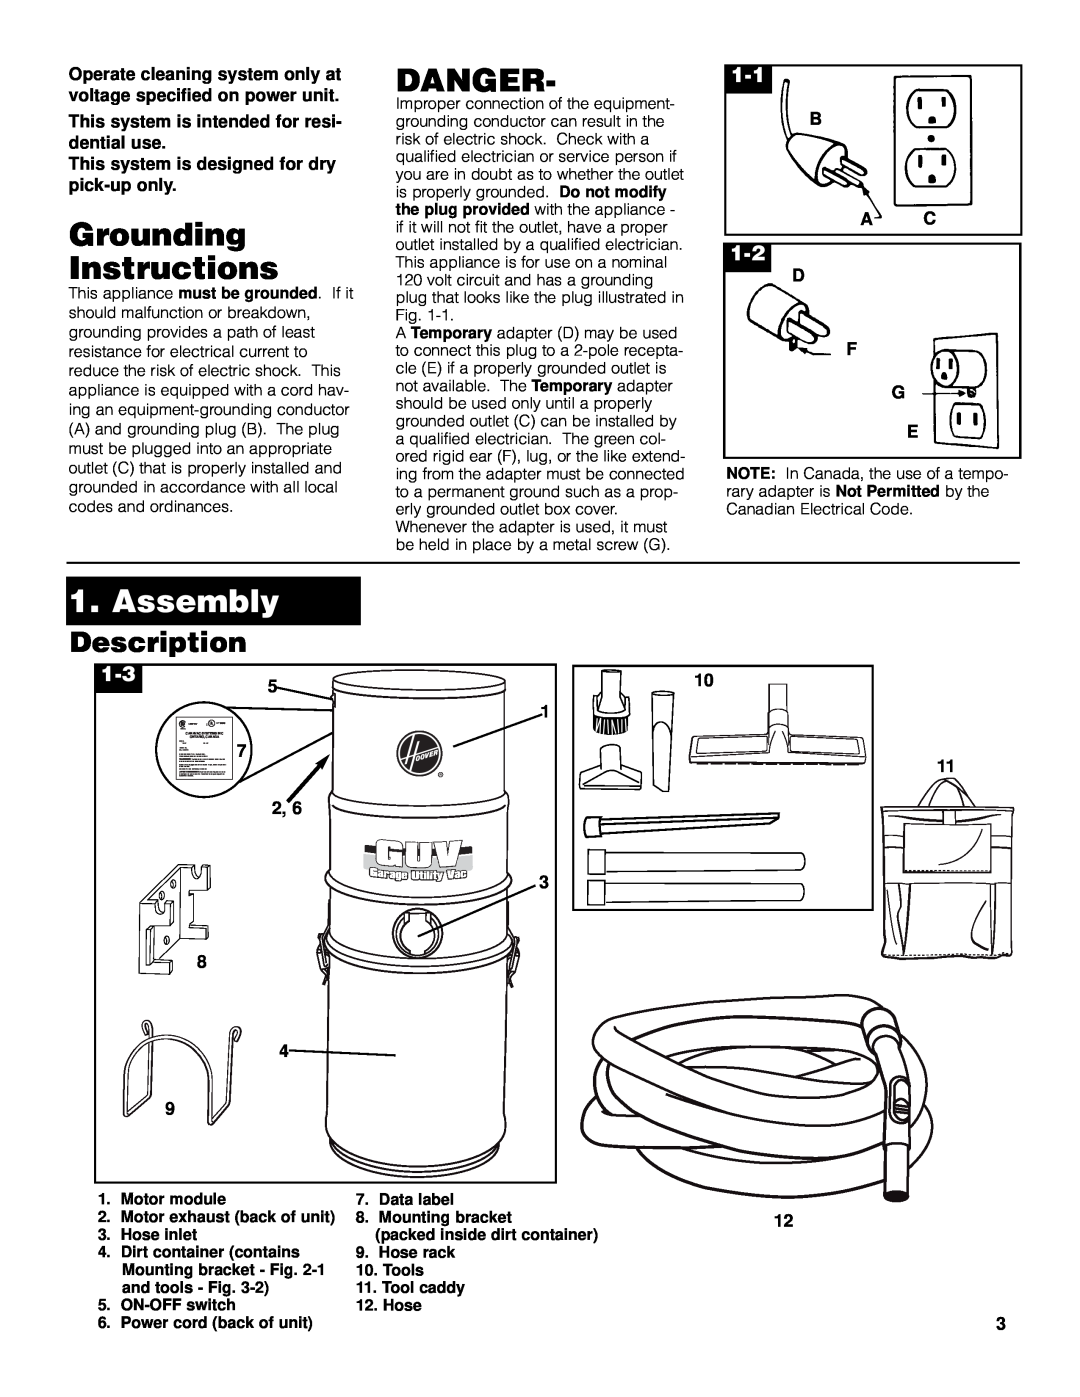 Hoover L2310 Grounding Instructions, Danger, Assembly, Description, This system is intended for resi- dential use, B A C 